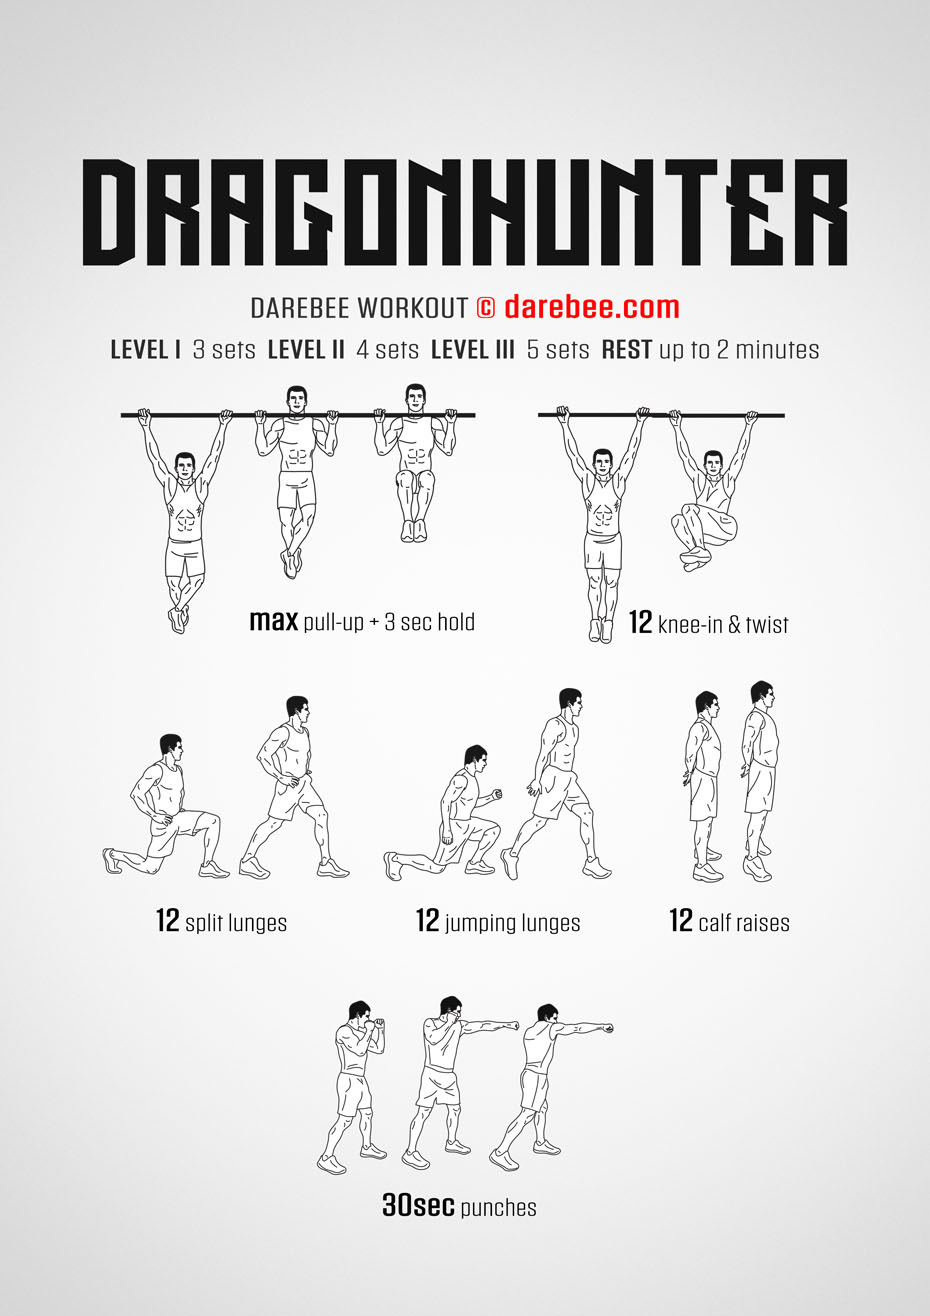 Dragonhunter is a DAREBEE home fitness total body strength home workout suitable for men and women who want advanced strength exercises at home.